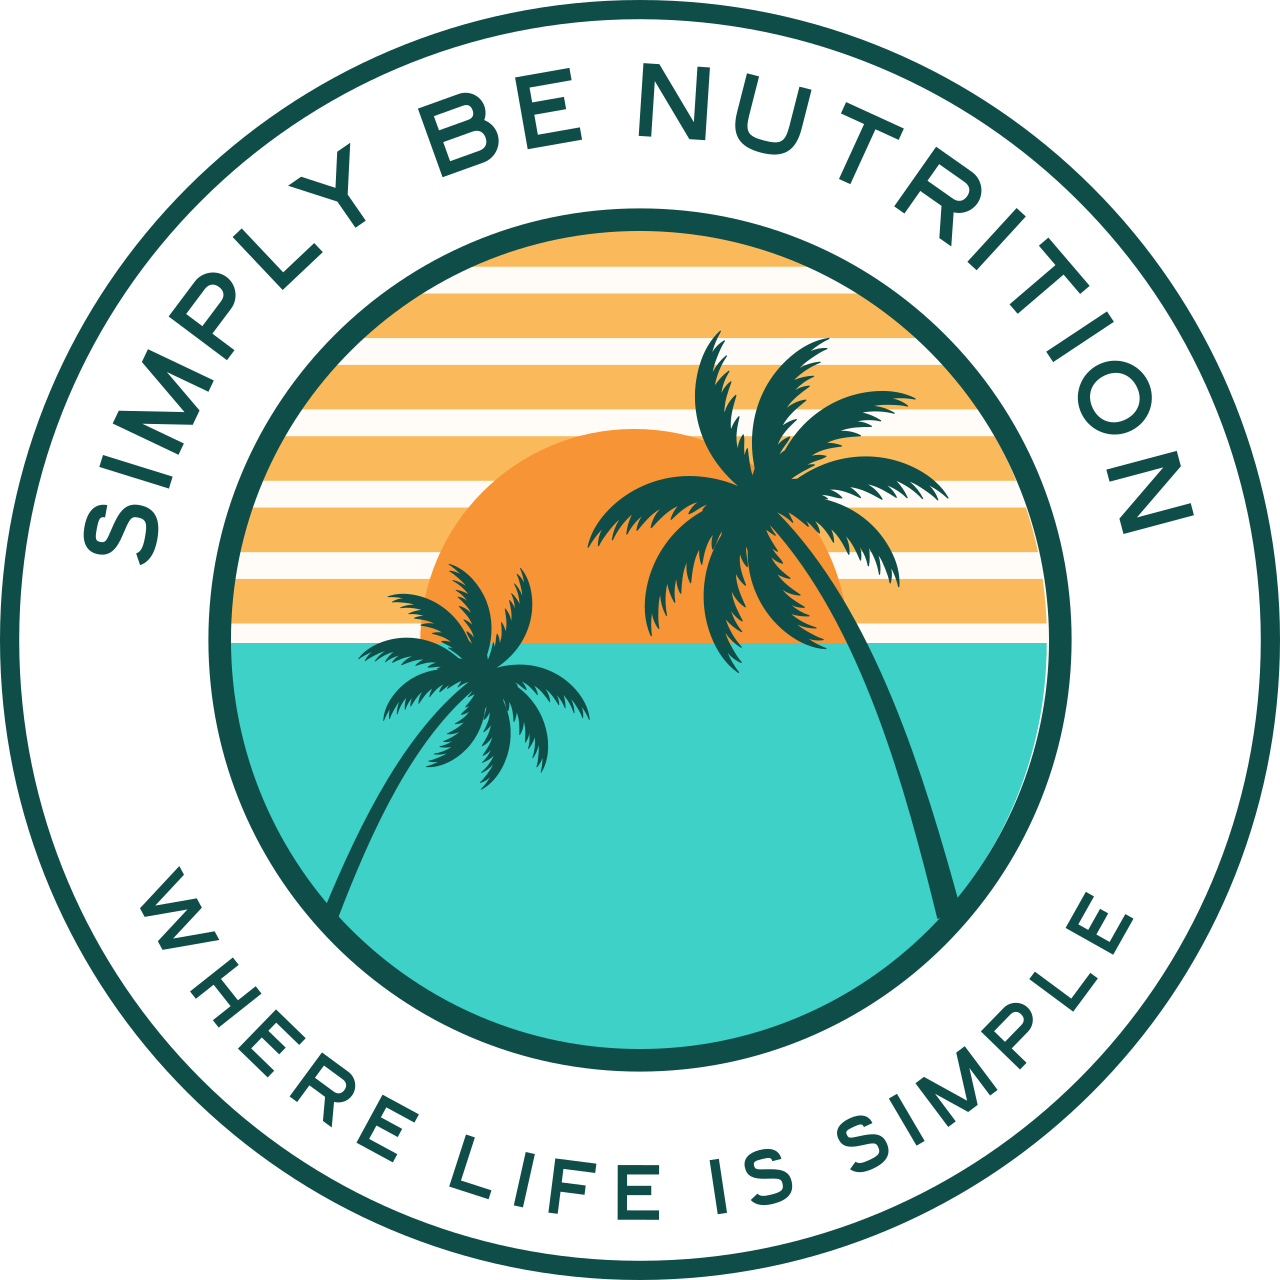 SIMPLY BE NUTRITION 's logo